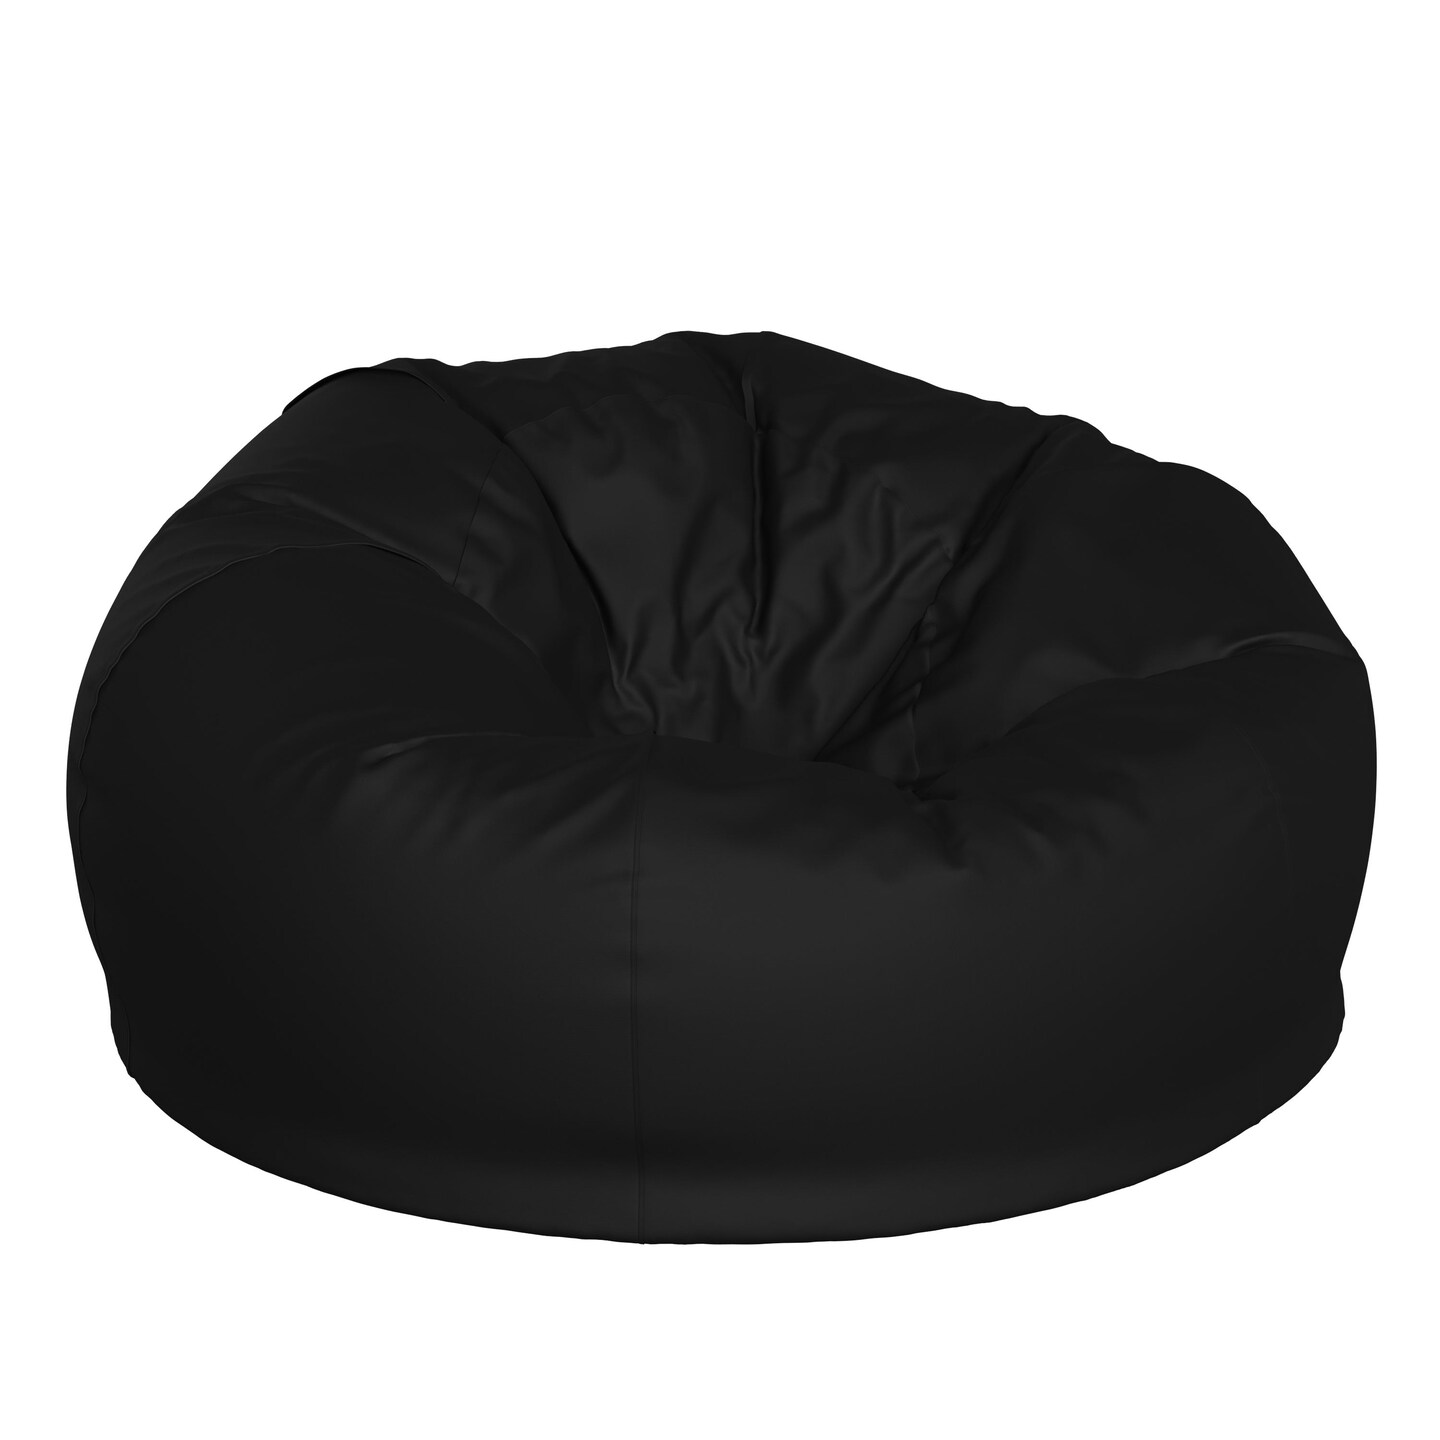 Emma and Oliver Oversized Bean Bag Chair for Kids and Adults